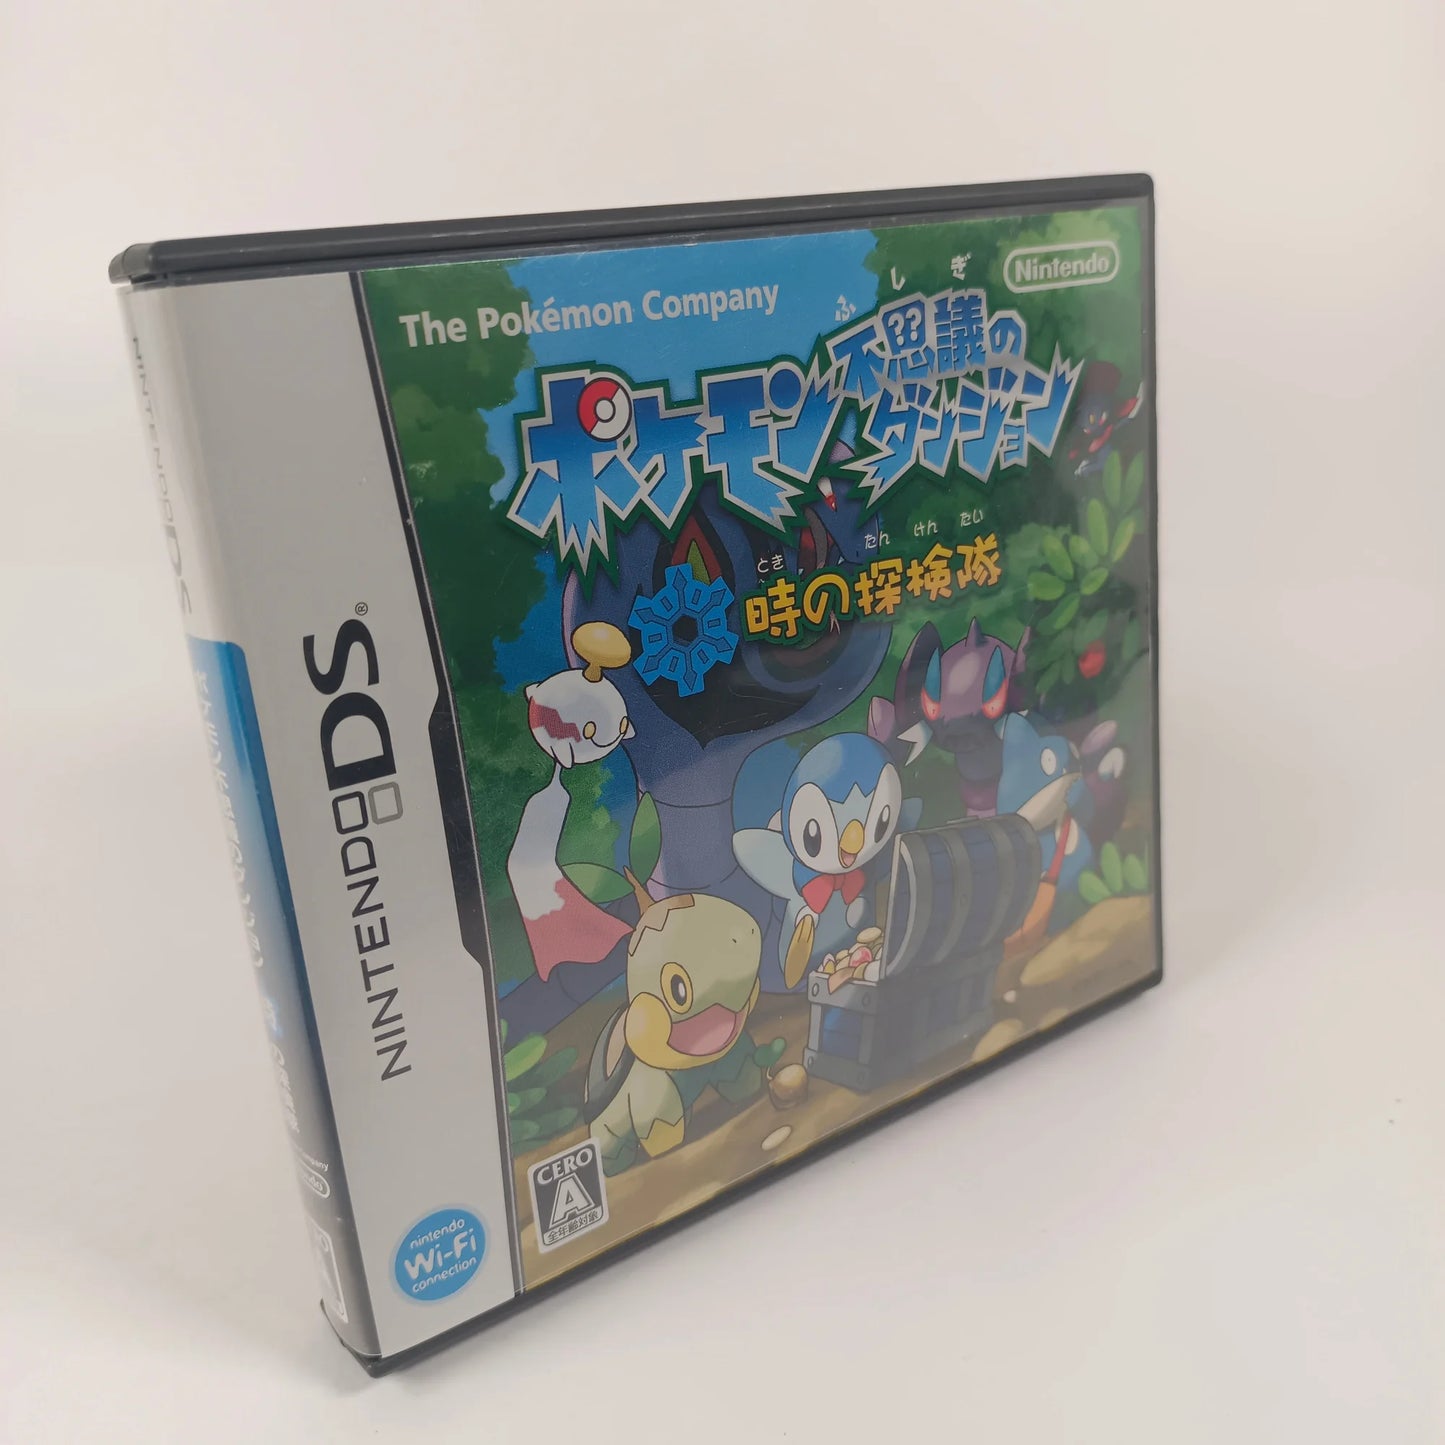 Pokémon Mystery Dungeon : Explorers of Time